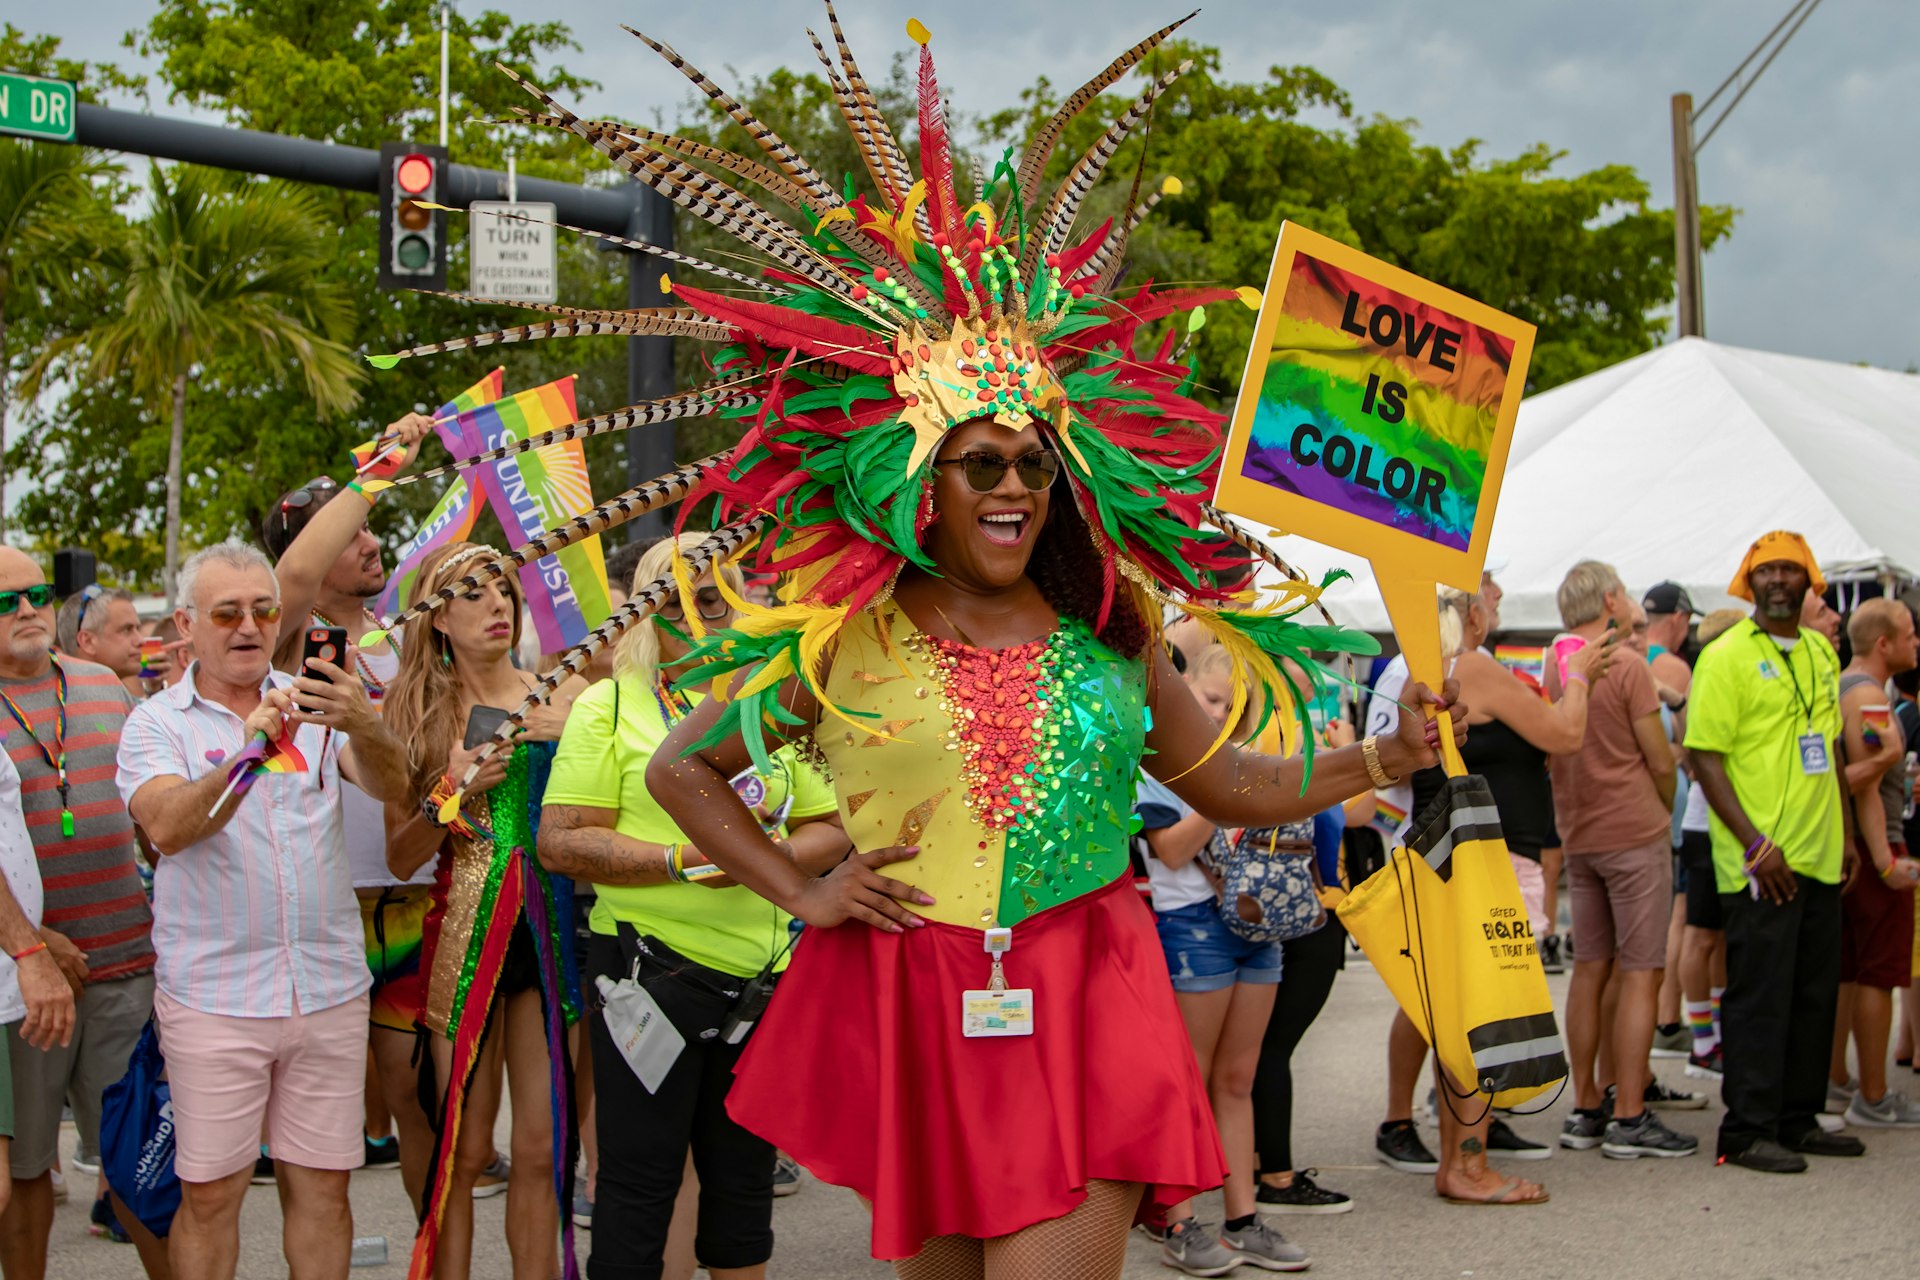 A woman in a bright, feathered costume at the Stonewall Pride Parade, Wilton Manors, Florida, USA